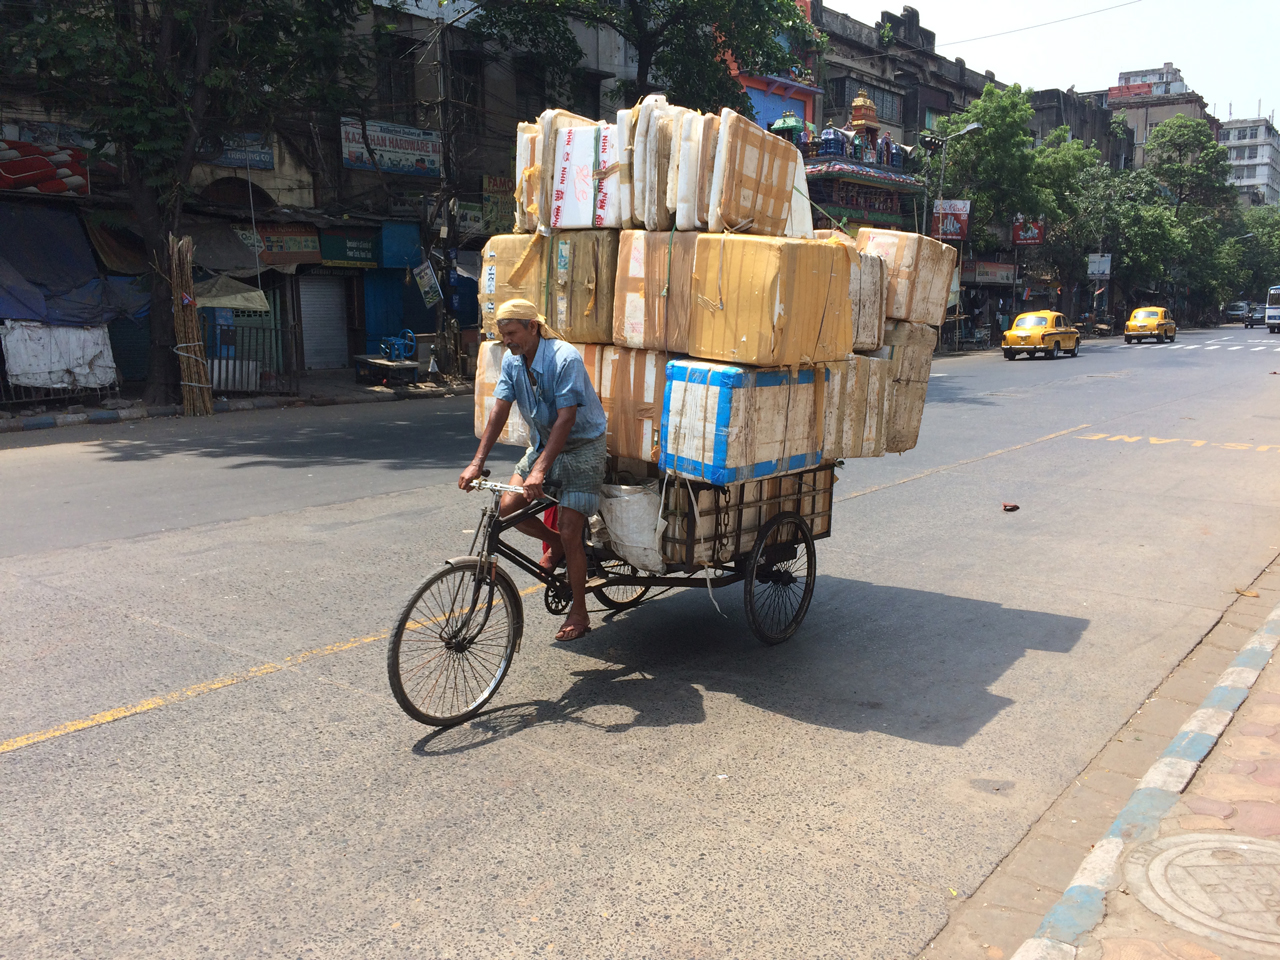 Man on bicycle with huge cargo